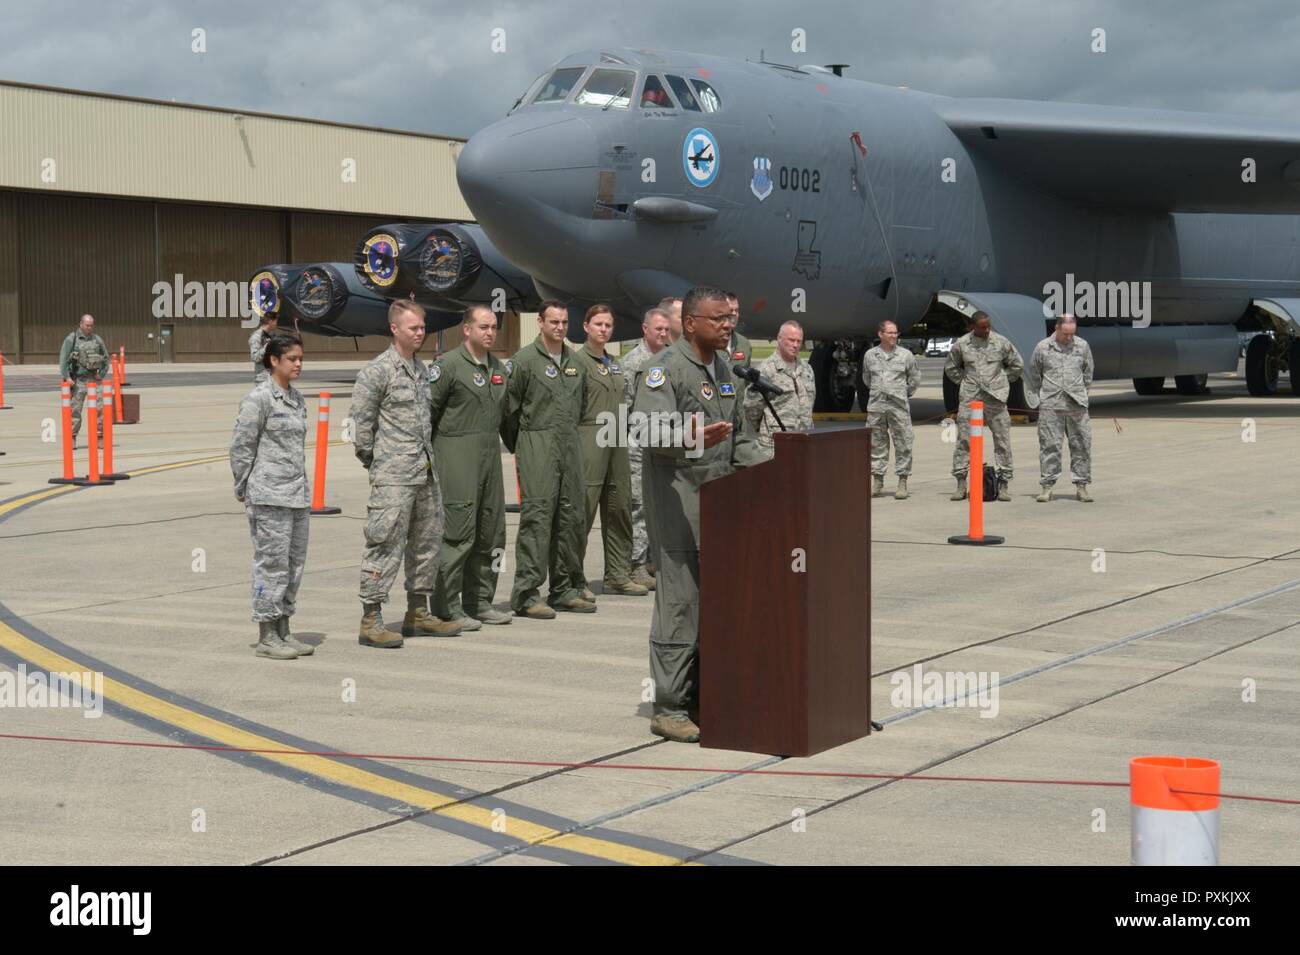 Lt. Gen. Richard Clark, 3rd Air Force commander, addresses news reporters in front of a 'tri-bomber' formation of a B-52H Stratofortress, a B-1B Lancer and a B-2 Spirit, during a media day event at RAF Fairford, U.K., June 12, 2017.  The event marked the first time in history that all three of Air Force Global Strike Command's strategic bomber aircraft simultaneously deployed to the European Theater as part of bomber assurance and deterrence operations. The forward presence of bomber aircraft and Airmen assists in maintaining high readiness for global reach capabilities. Stock Photo